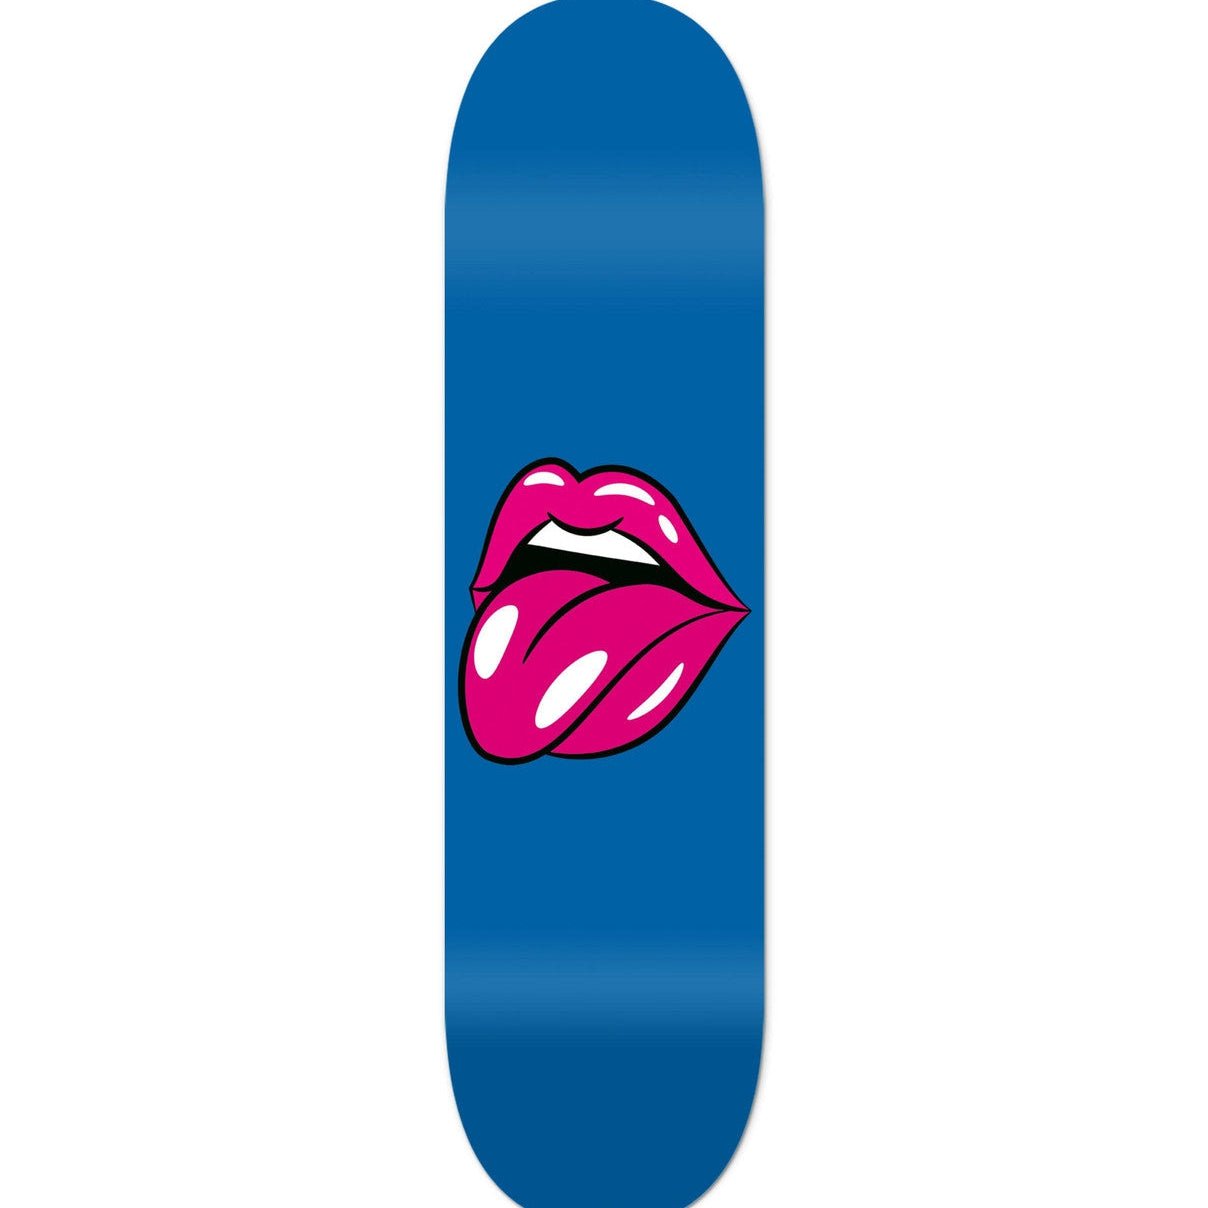 "Lips Blue" - Skateboard - The Art Lab Acrylic Glass Art - Skateboards, Surfboards & Glass Prints Wall Decor for your Home.